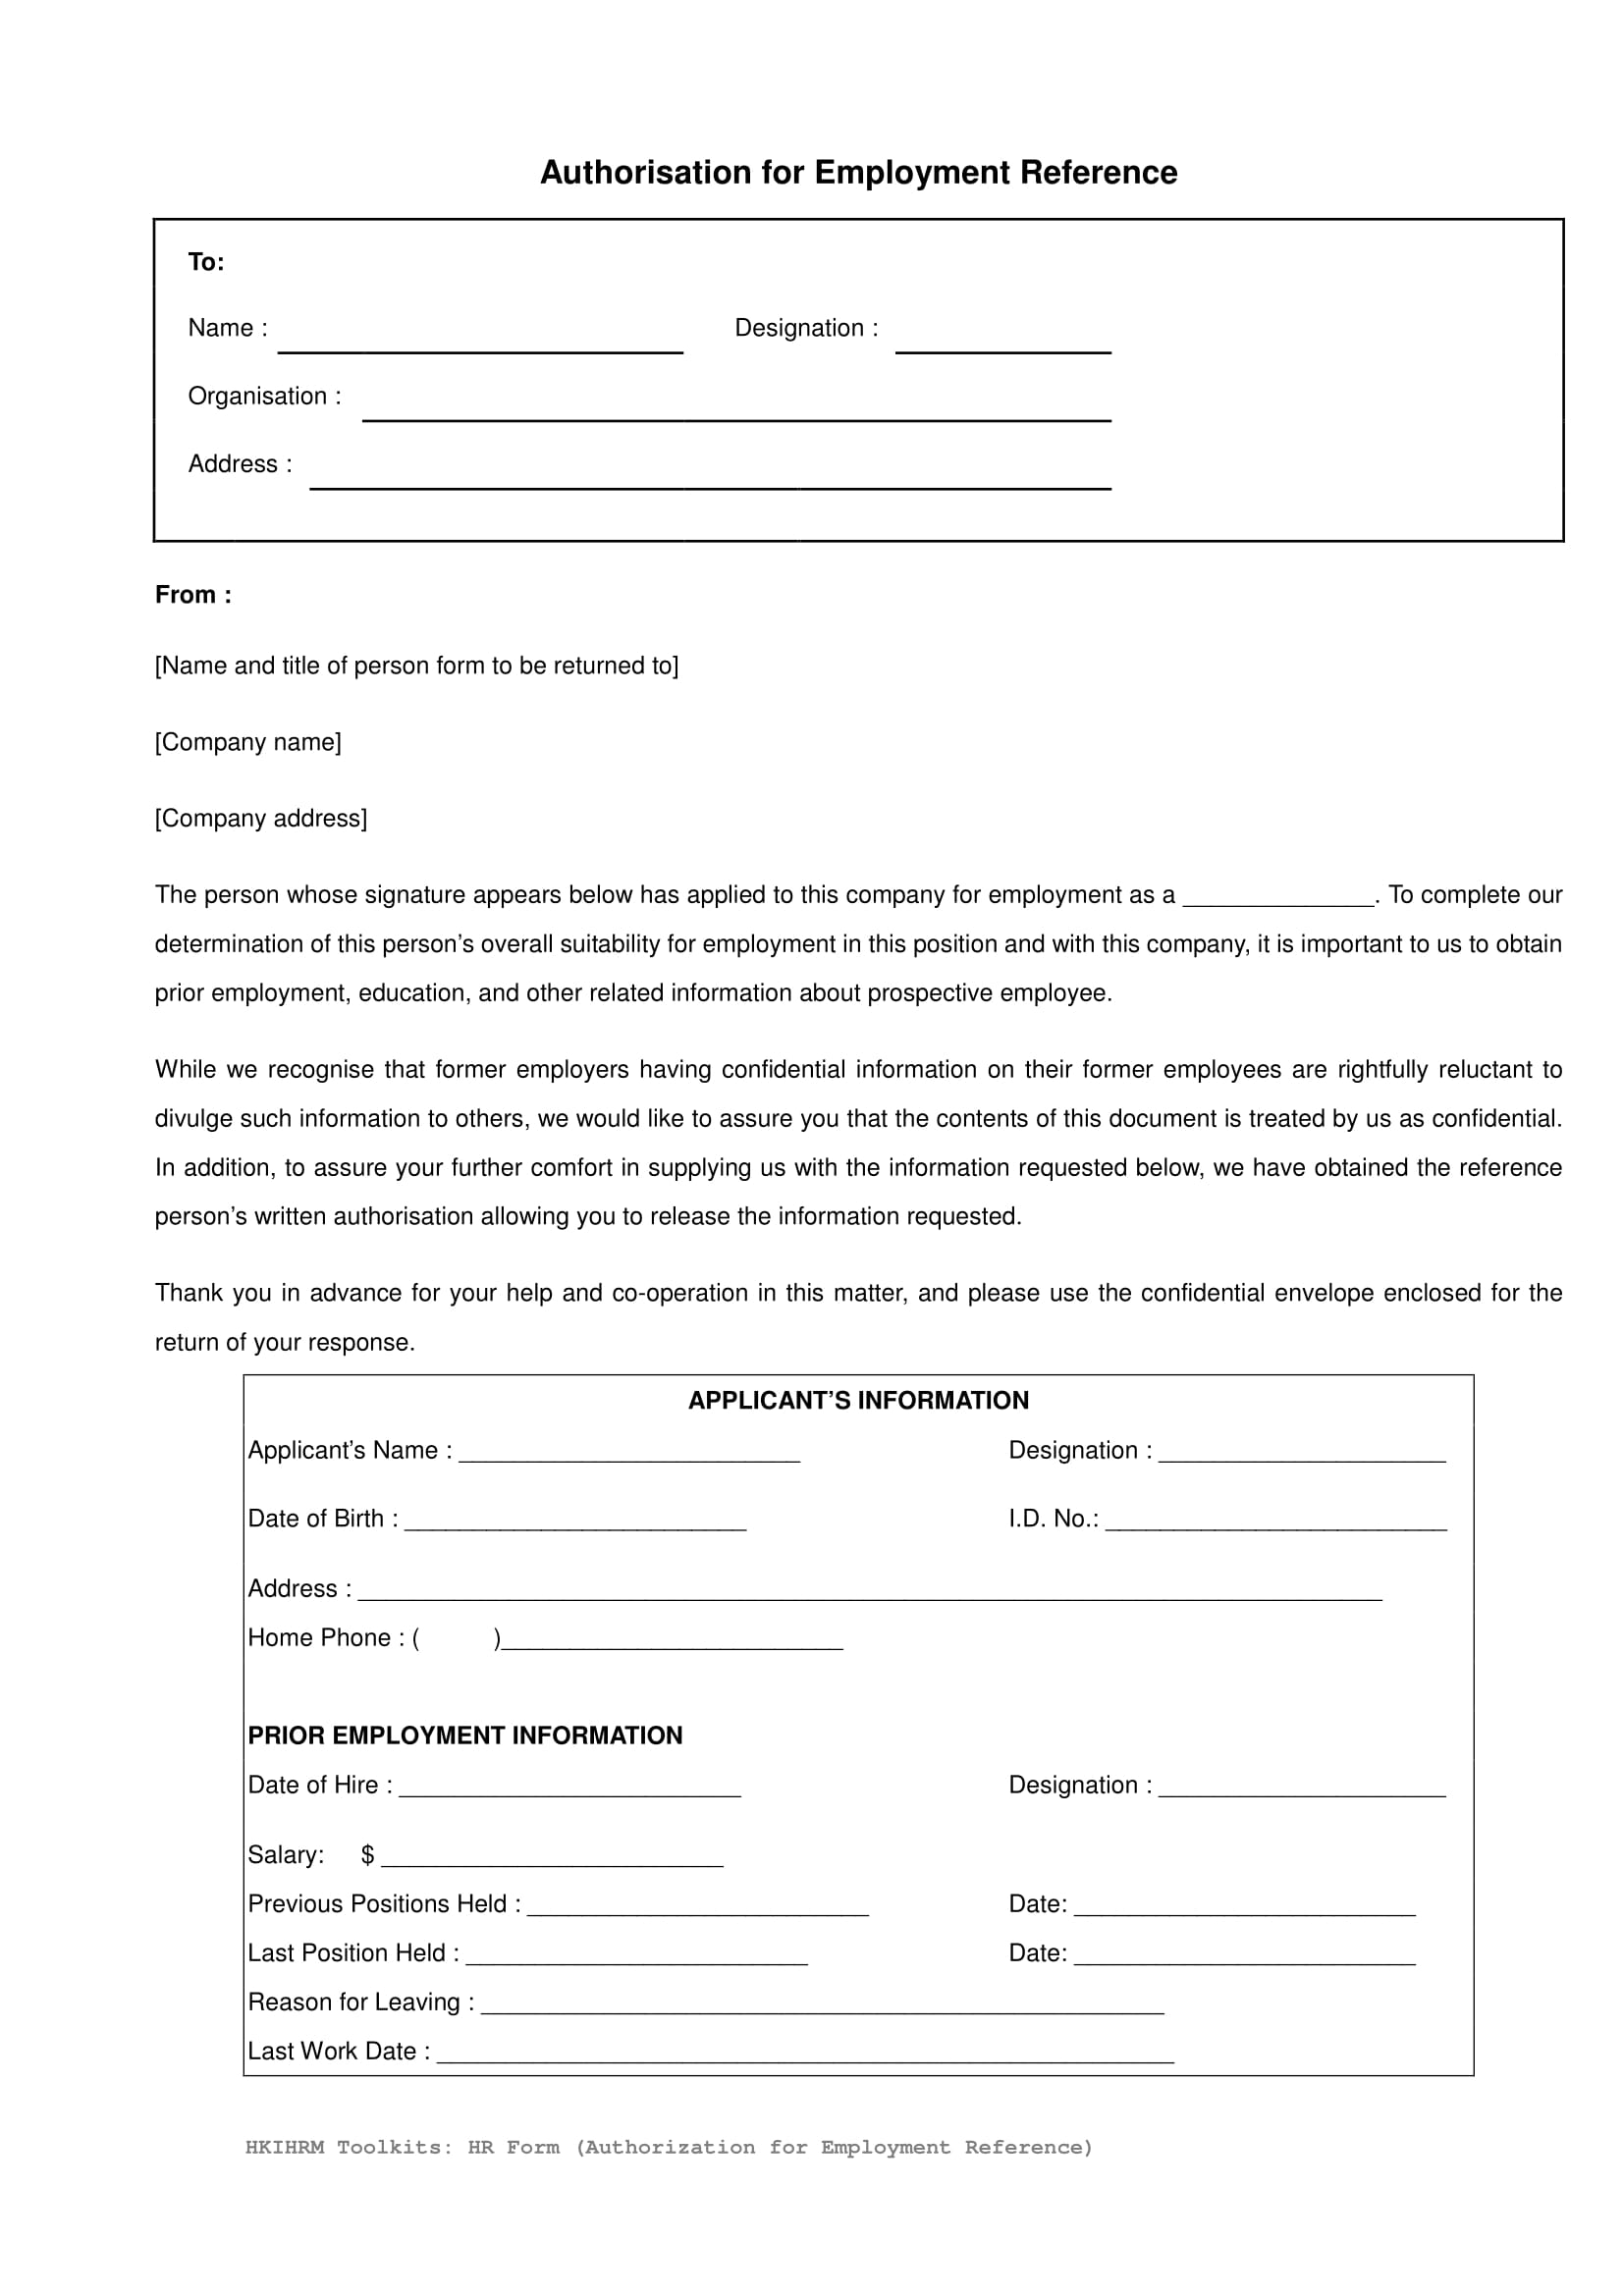 employment reference release authorization form 1